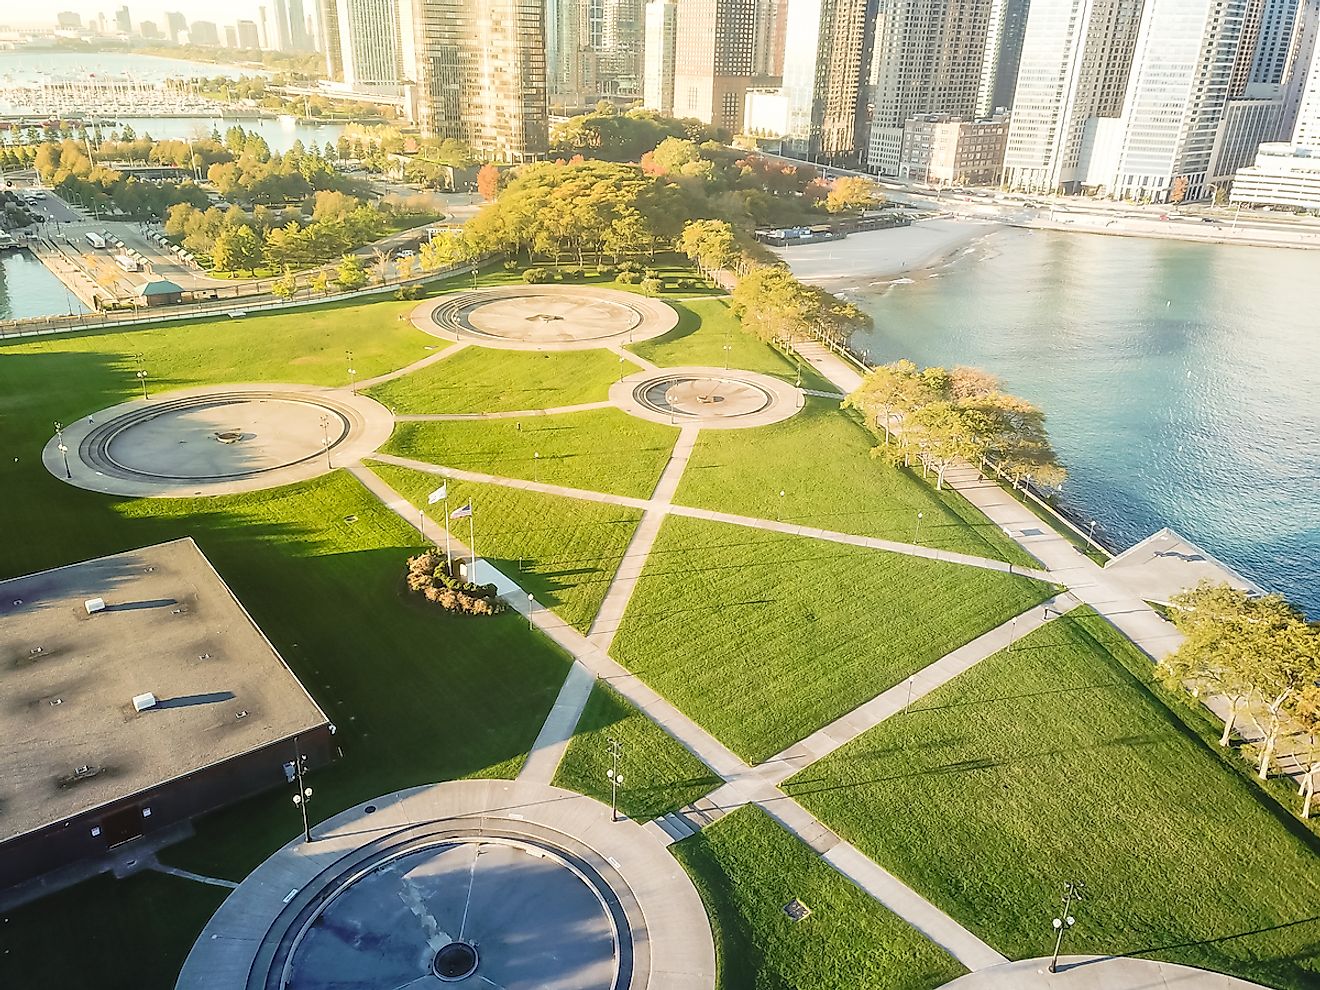 Bird eye view of waterfront Milton Lee Olive Park with Chicago skylines in early morning light. Image credit: Trong Nguyen/Shutterstock.com